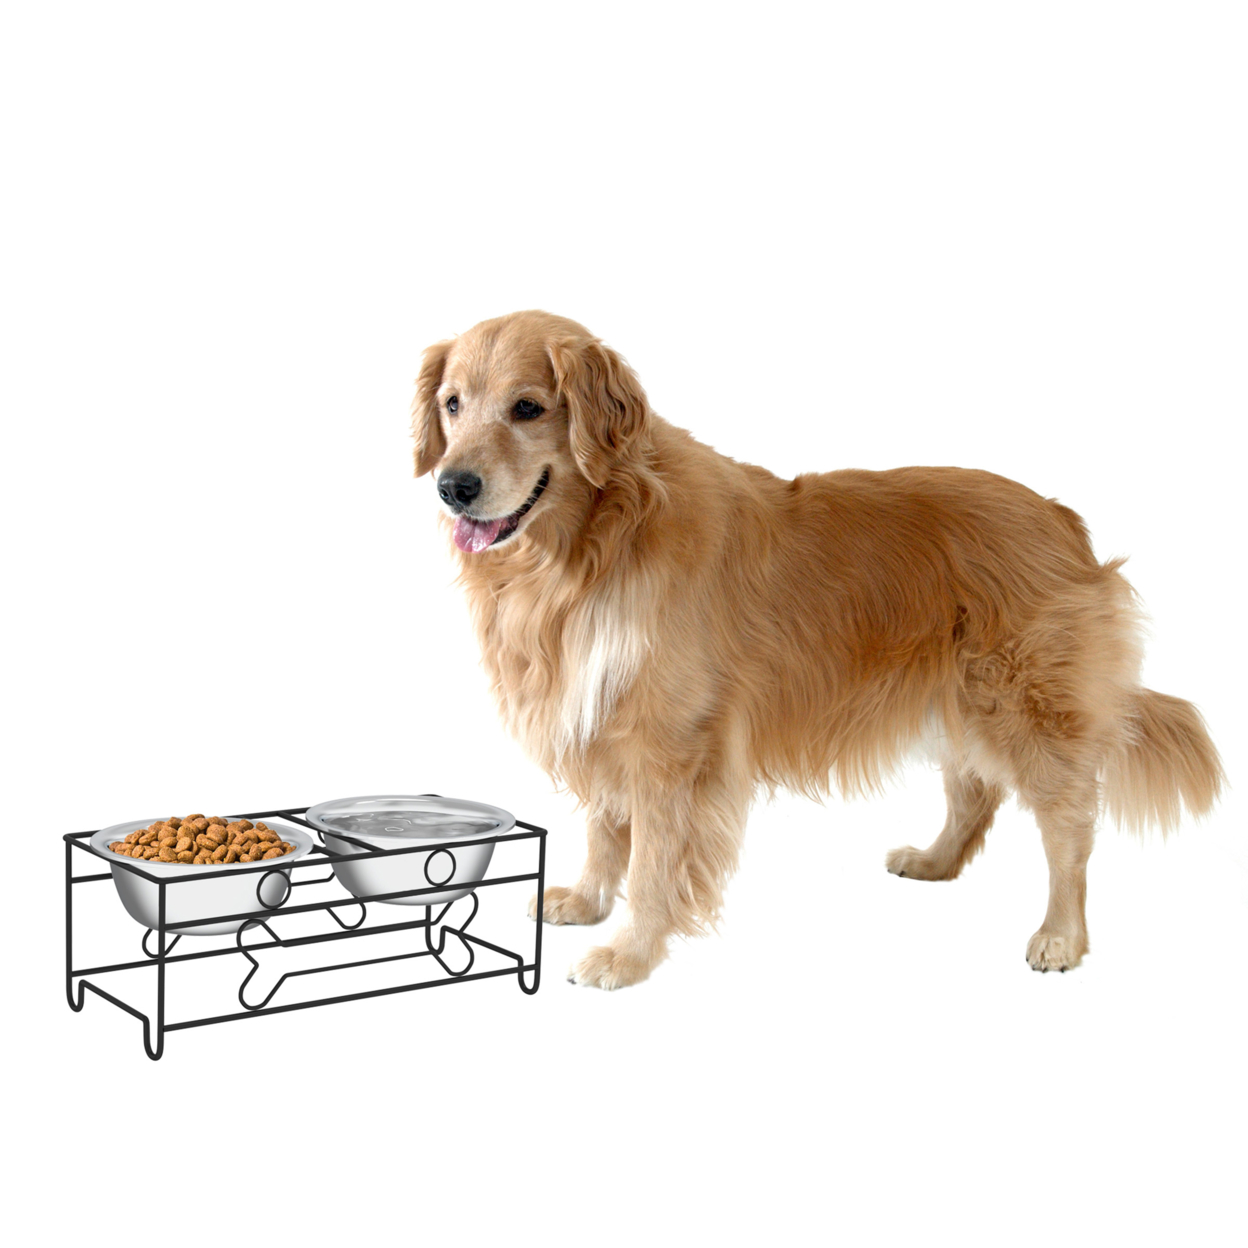 Stainless Steel Raised Food And Water Bowls Bone Decor 6.5 Inch Tall Stand For Dogs And Cats-2 Bowls, 40 Oz